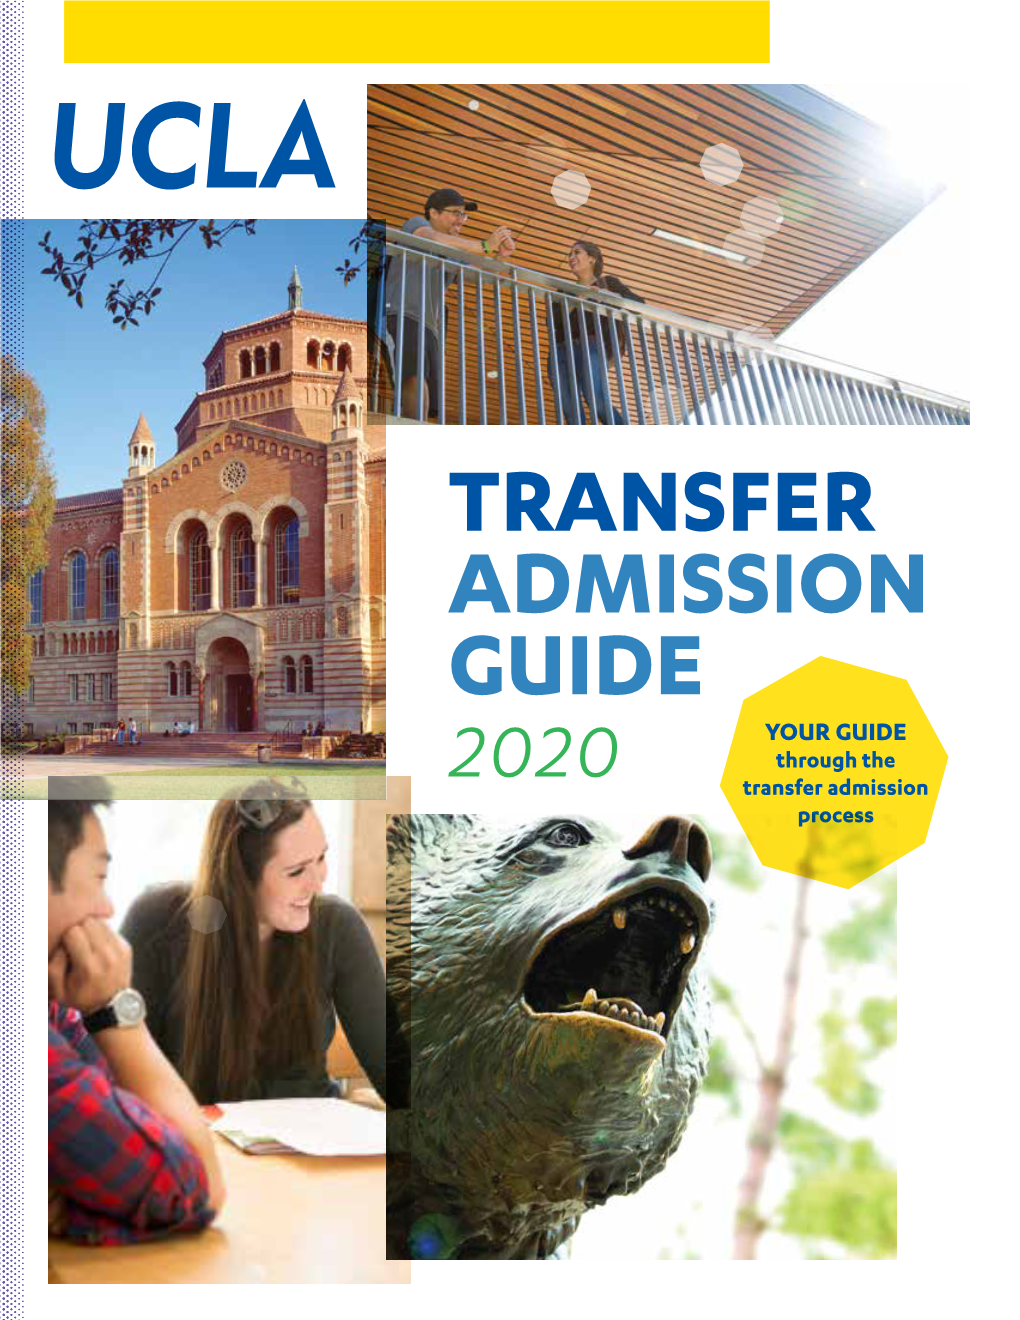 UCLA Transfer Admission Guide 2020